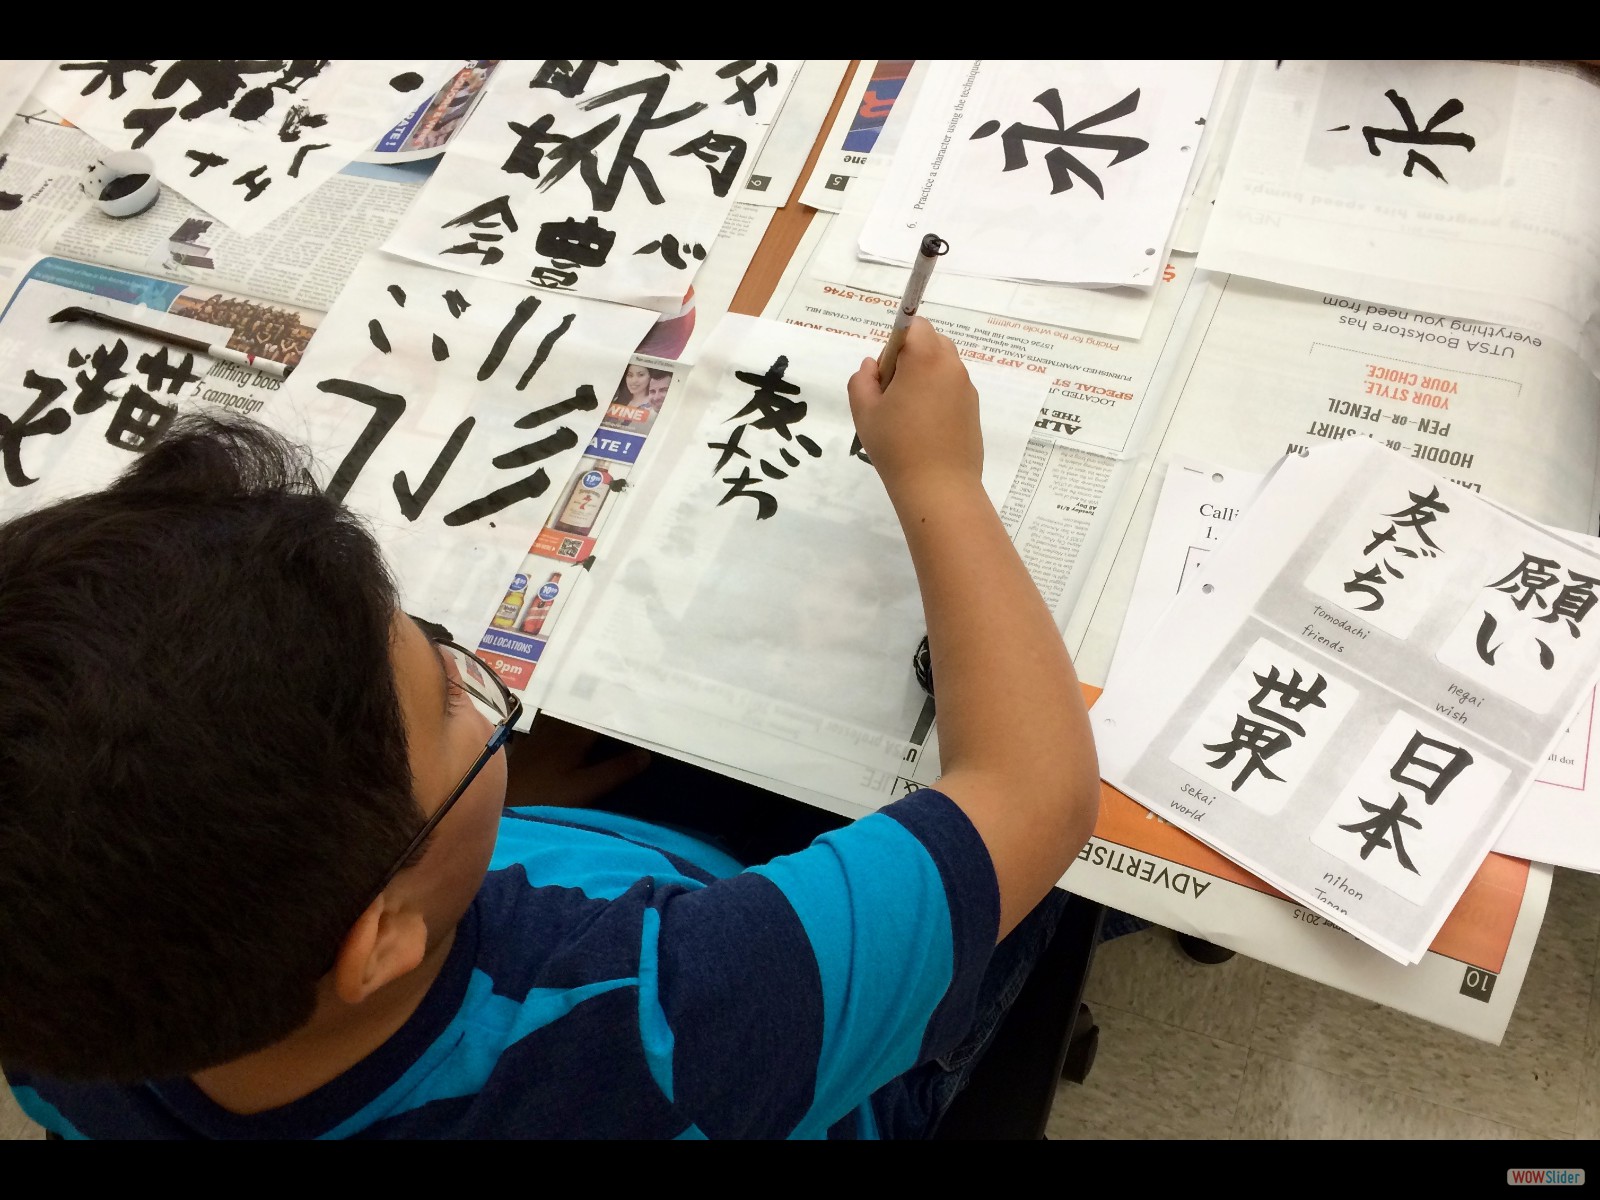 Instructors were impressed with Diego's first-time calligraphy.